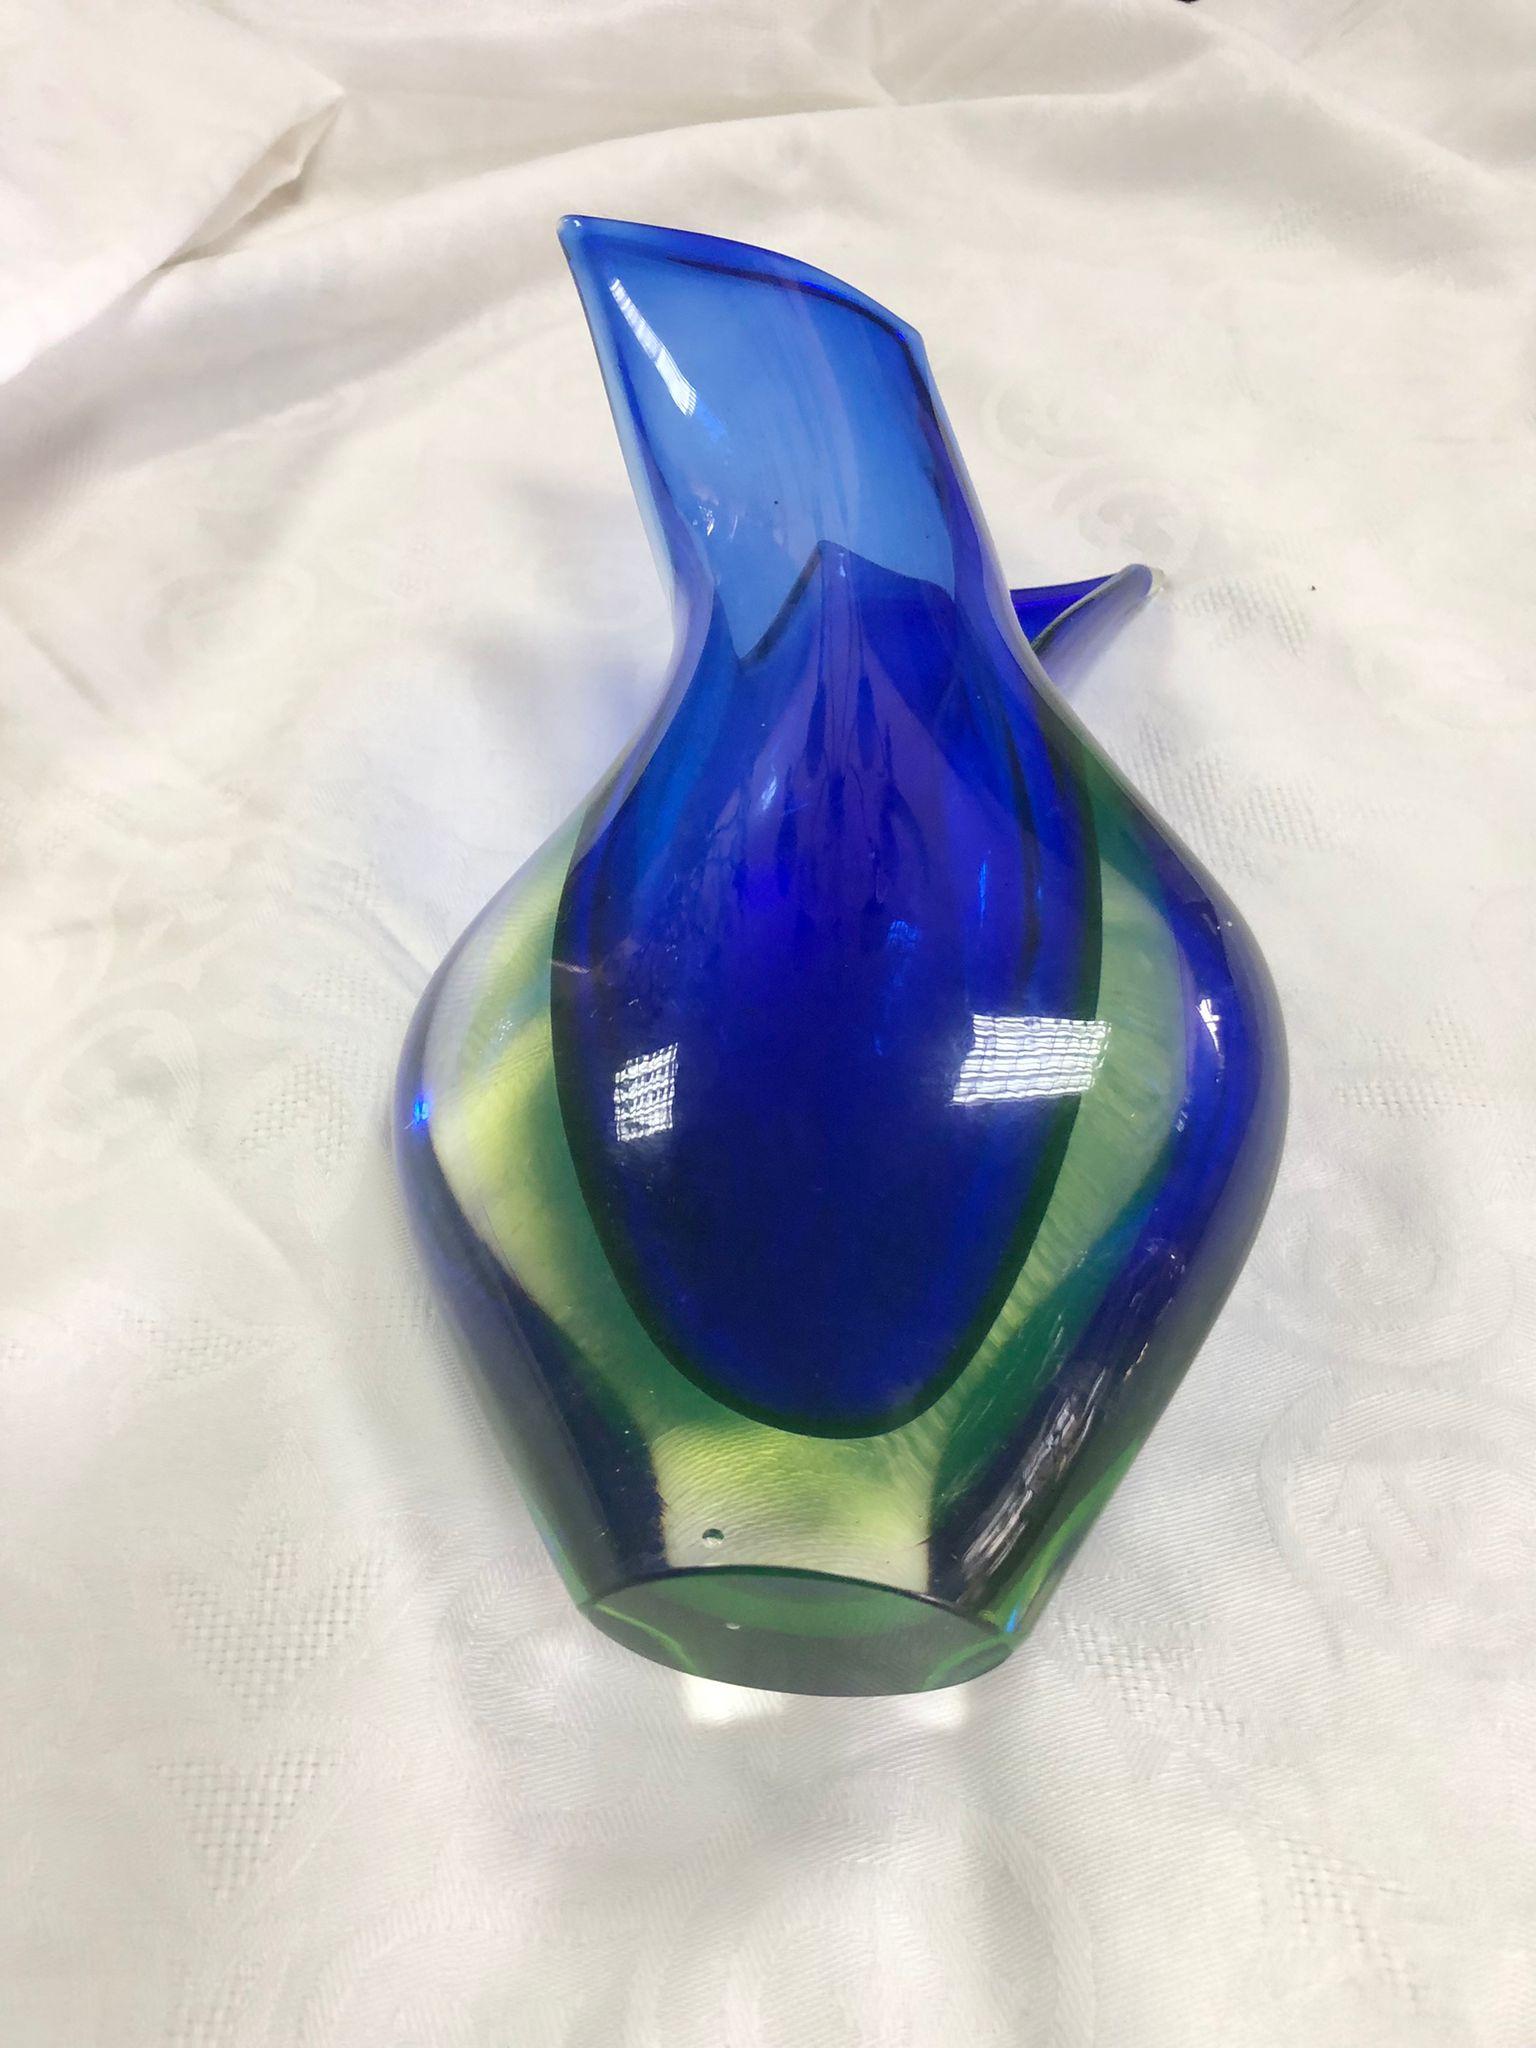 Glass vase by Flavio Poli for Seguso 1950. Made on the island of Murano, Venice, Italy. In a beautiful combination of Blue glass encased in glass, which is further encased in clear glass with shades of Green, using the renowned Venetian Sommerso